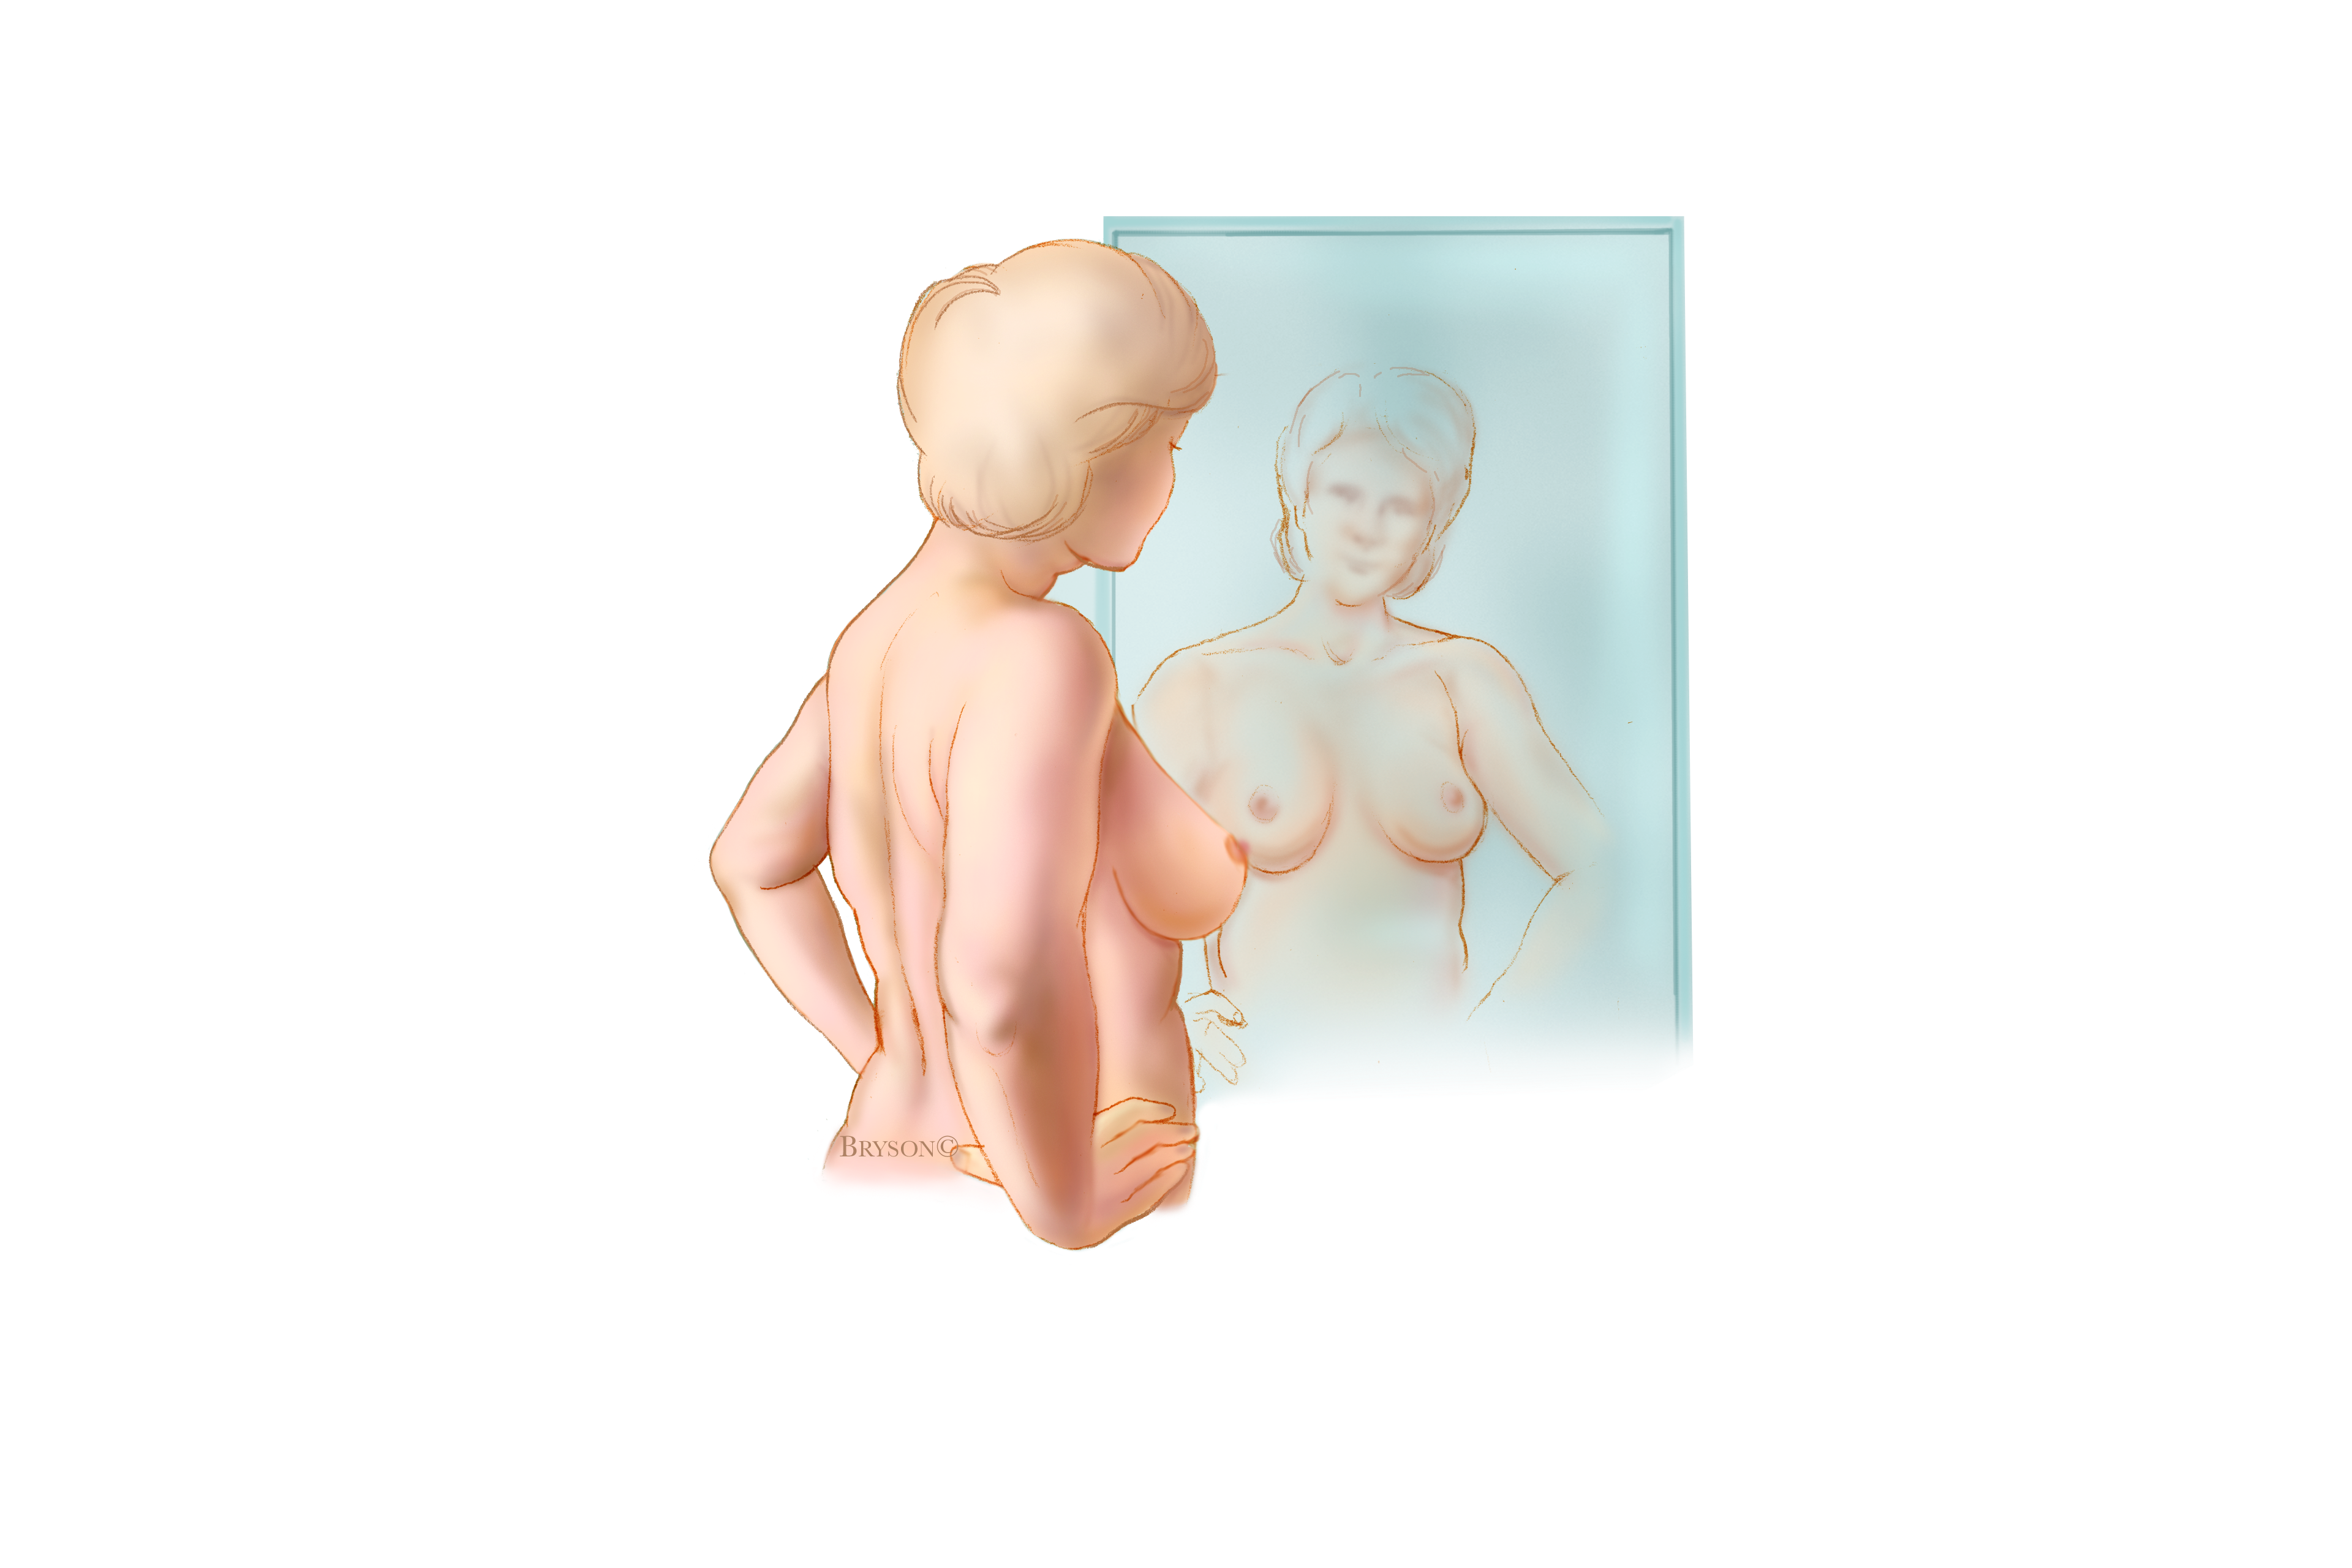 Breast Self-Exam - Step 1: person self-examining breasts in the mirror with shoulders straight and arms on hips.